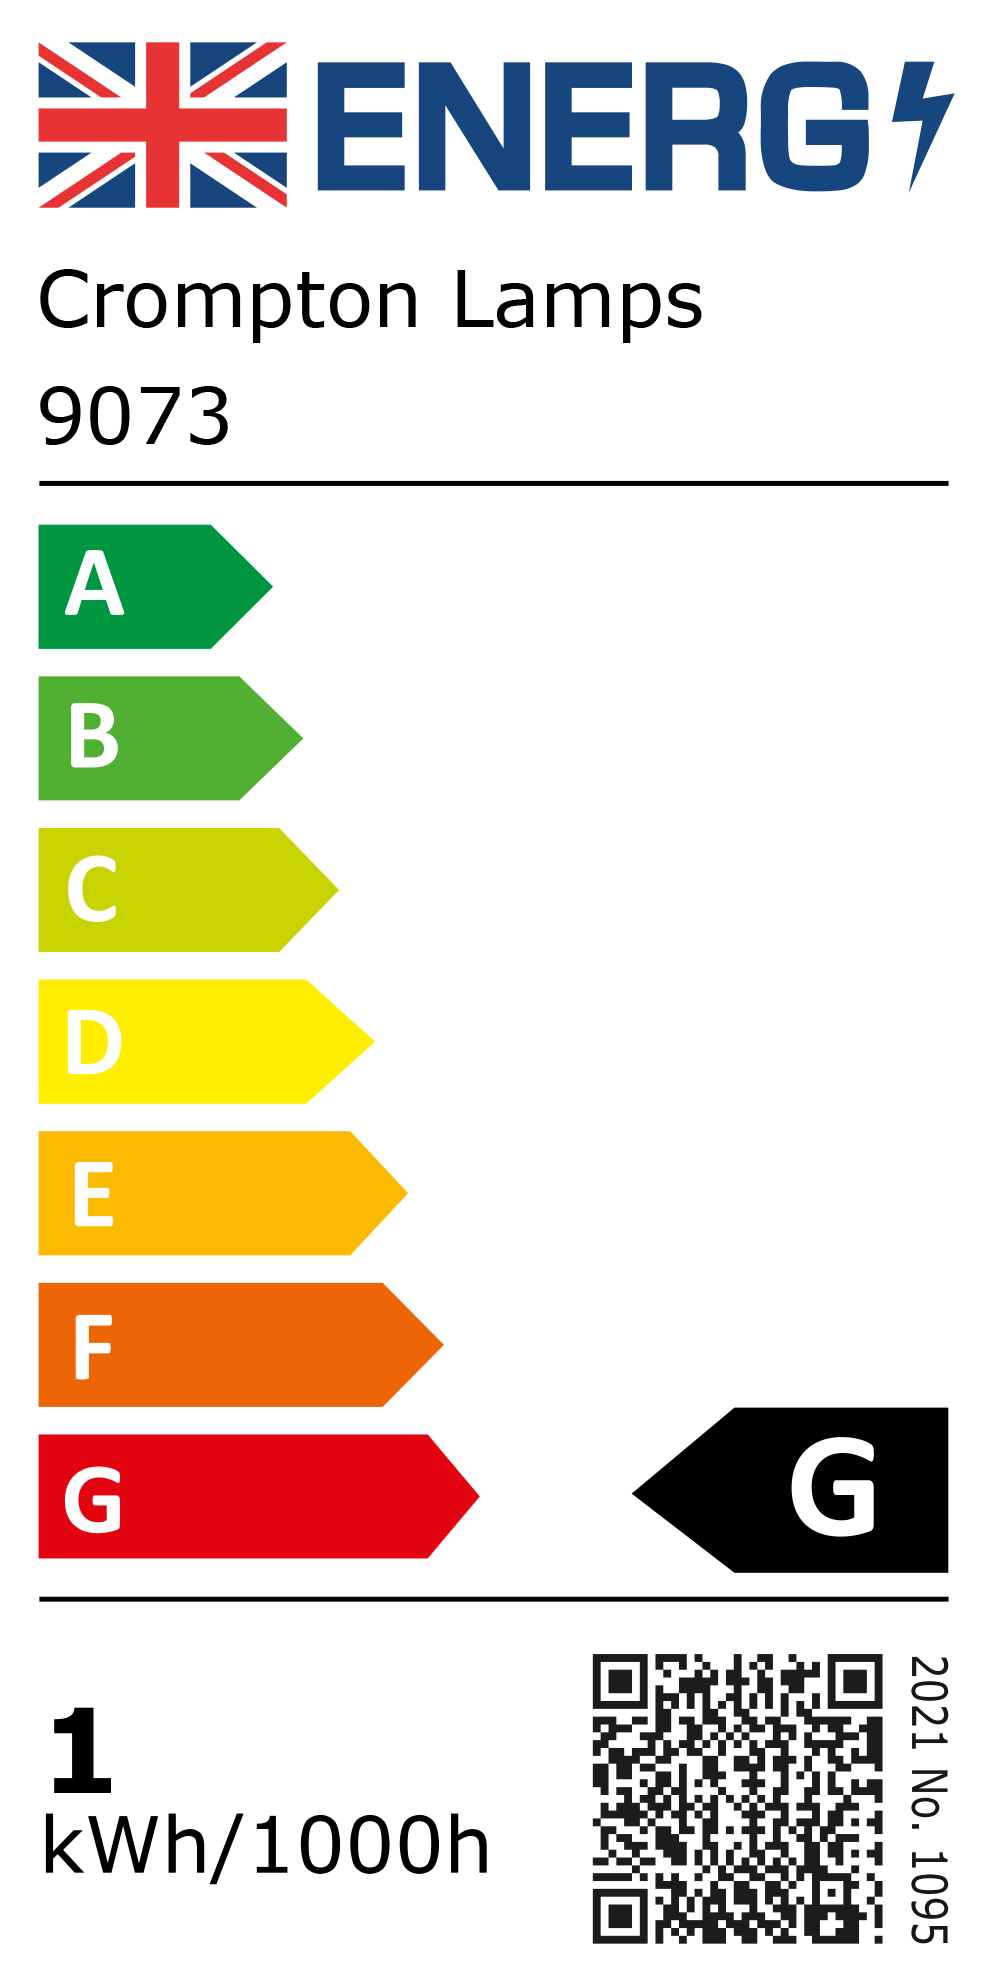 New 2021 Energy Rating Label: Stock Code 9073